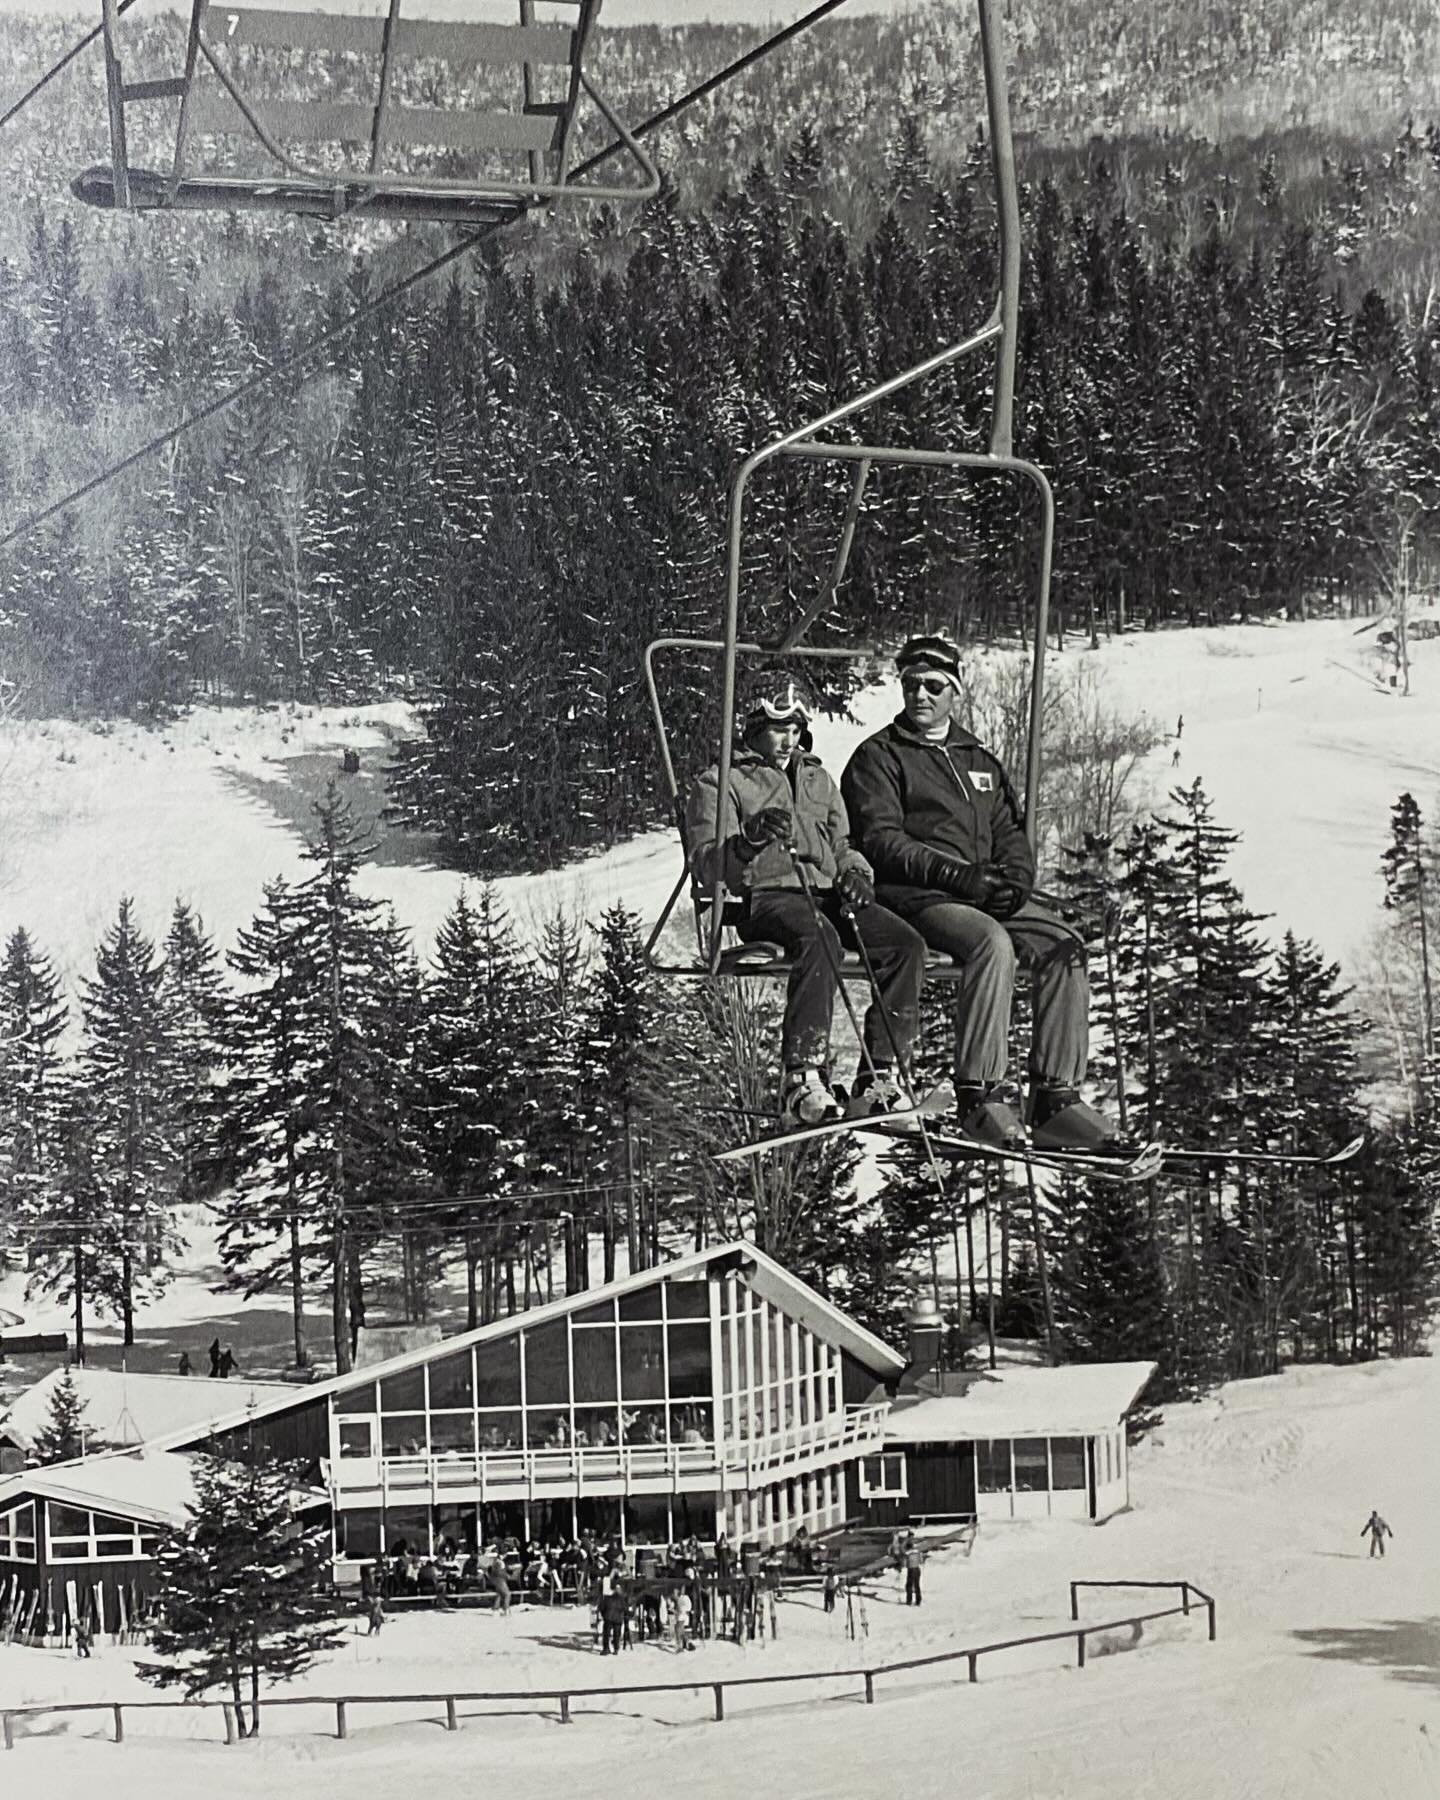 Throwback Thursday: Photos from a different era. 1st: Worth Mtn Chair. 2nd: View down the old ski jump towards the lodge.